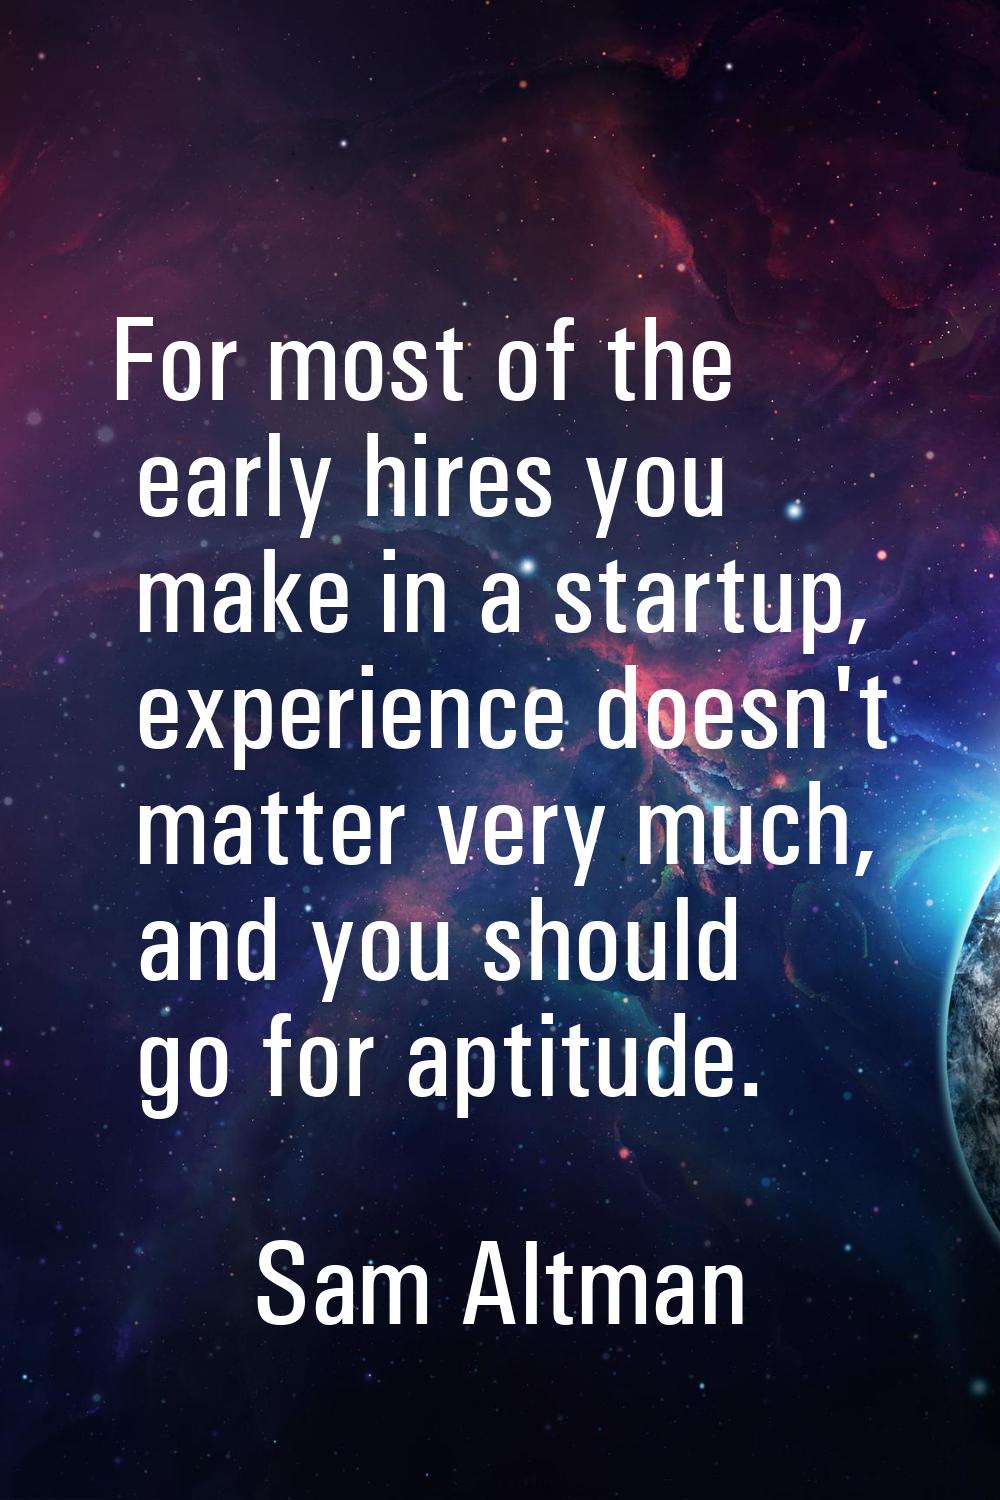 For most of the early hires you make in a startup, experience doesn't matter very much, and you sho